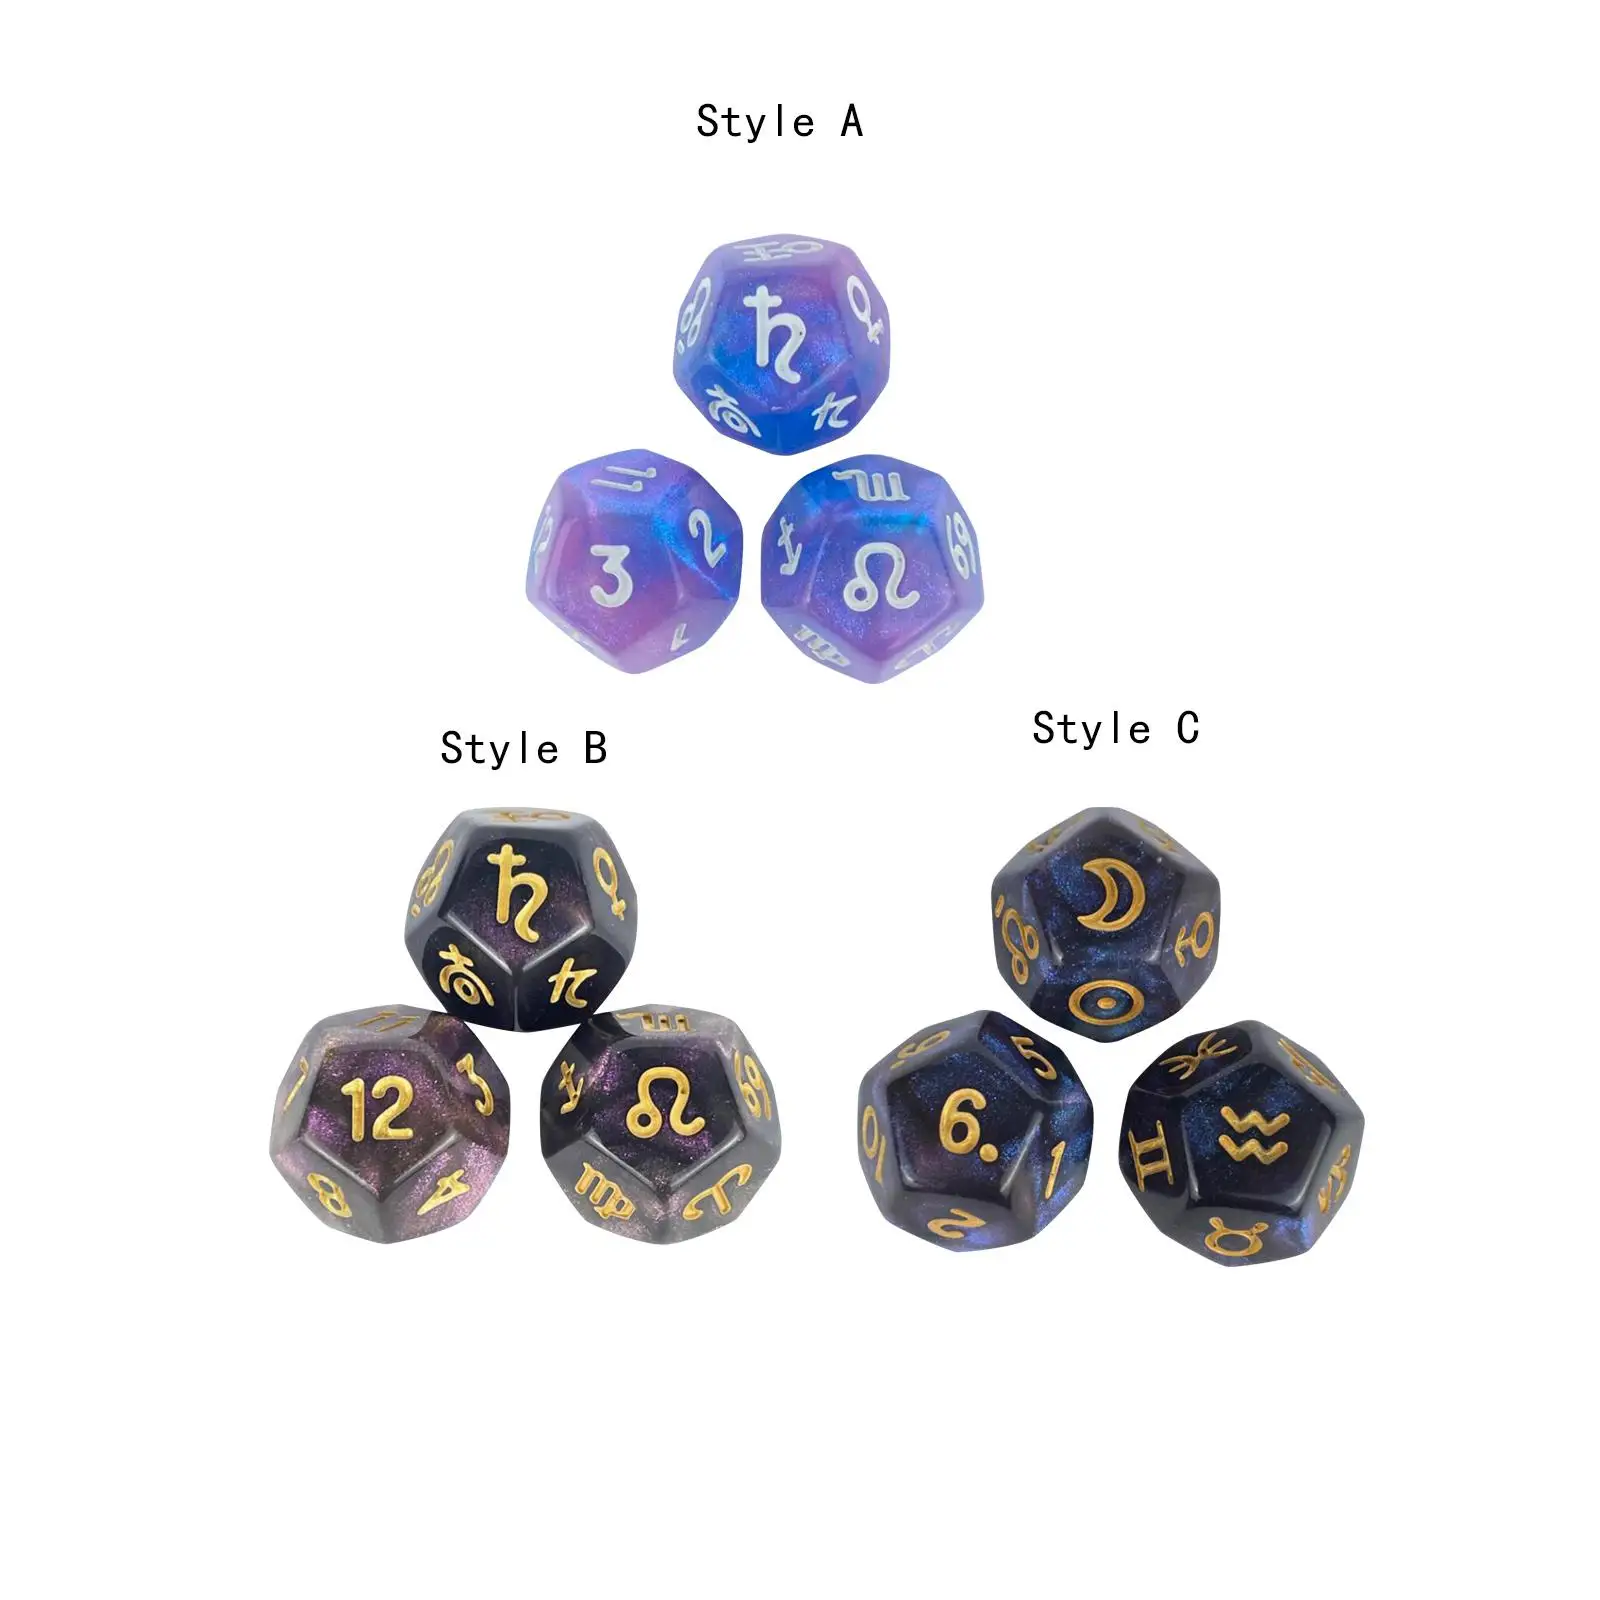 3 Pieces Constellation Dice Board Games Collectibles Acrylic Astrology Signs Dice for Party Astro Divination Gaming Accessory